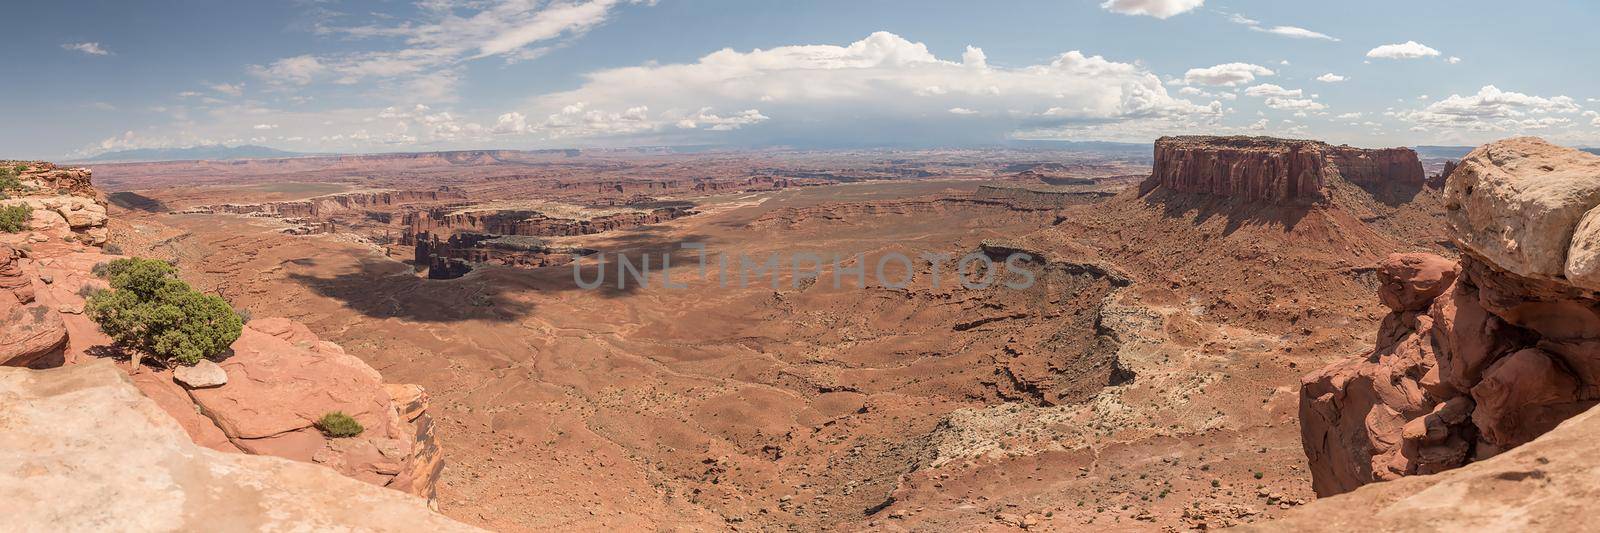 Panorama of Canyonlands landscape in Utah showing huge brown canyon